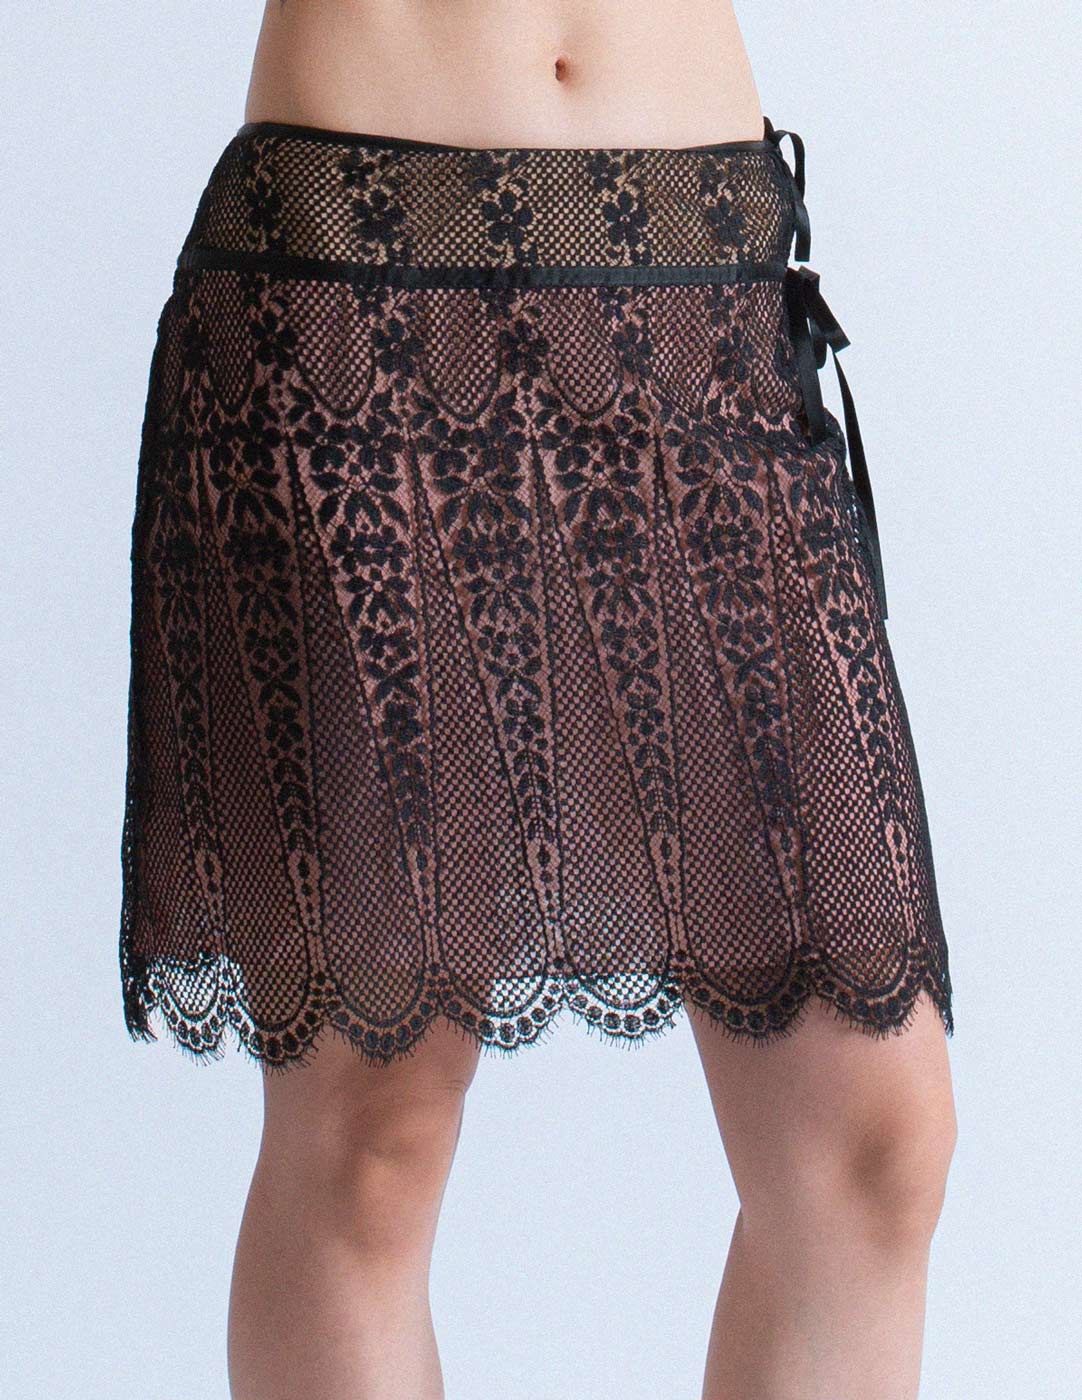 Blumarine lace skirt with ties front detail